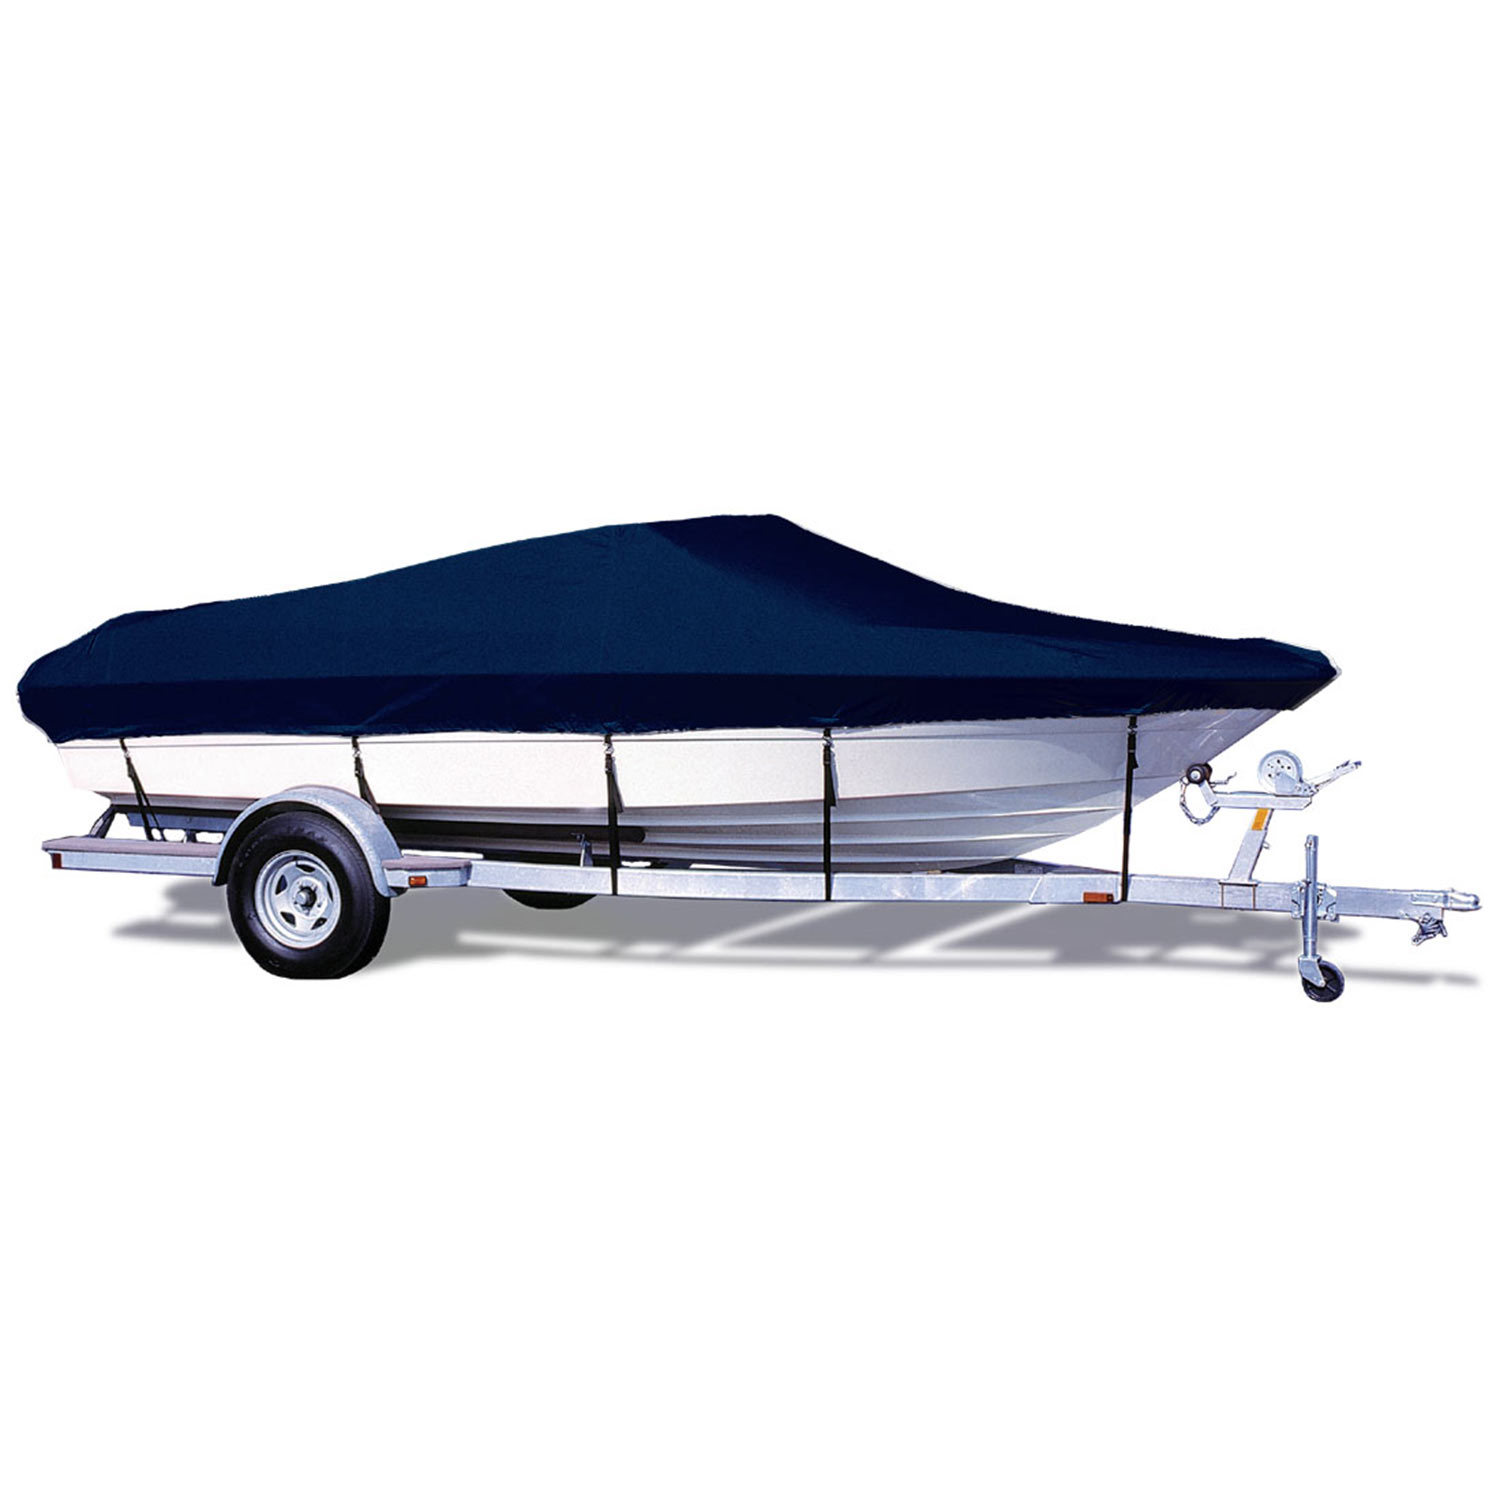 Taylor BoatGuard Universal Fit Trailerable Boat Cover With Storage